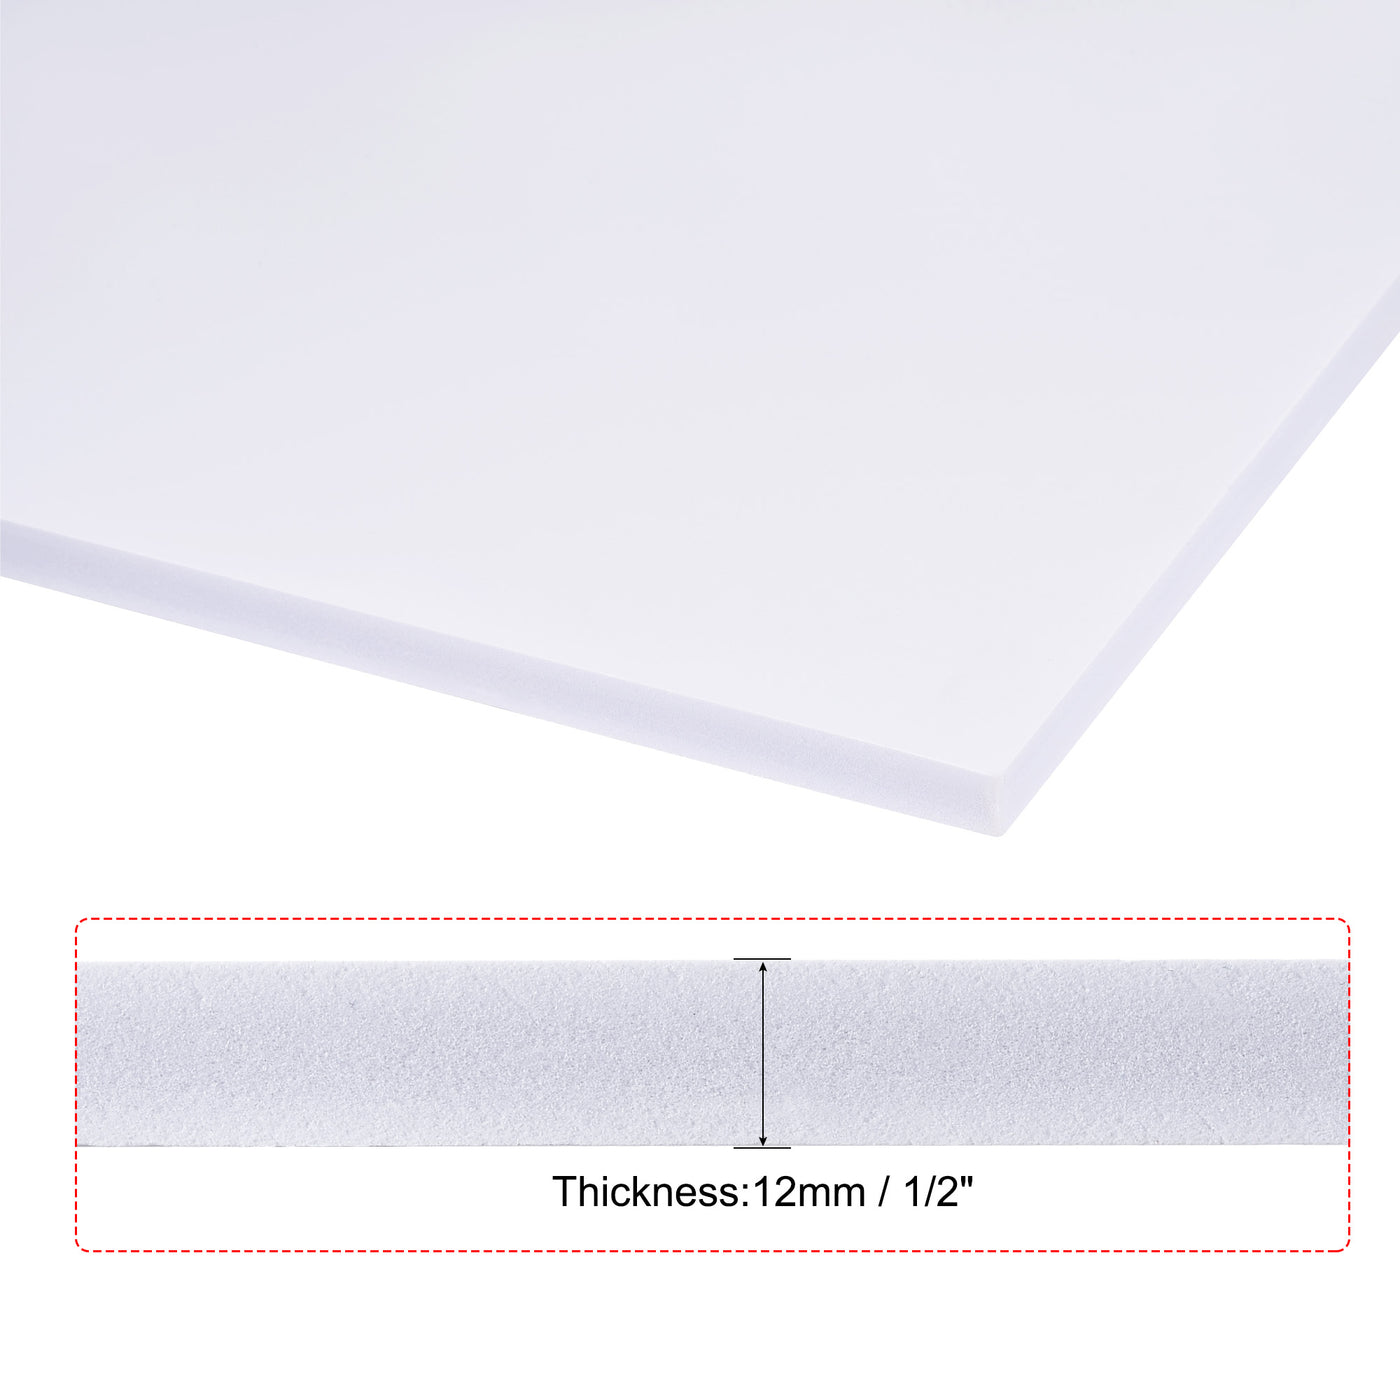 uxcell Uxcell PVC Foam Board Sheet,12mm x 300mm x 300mm,Double Sided,Expanded PVC Sheet